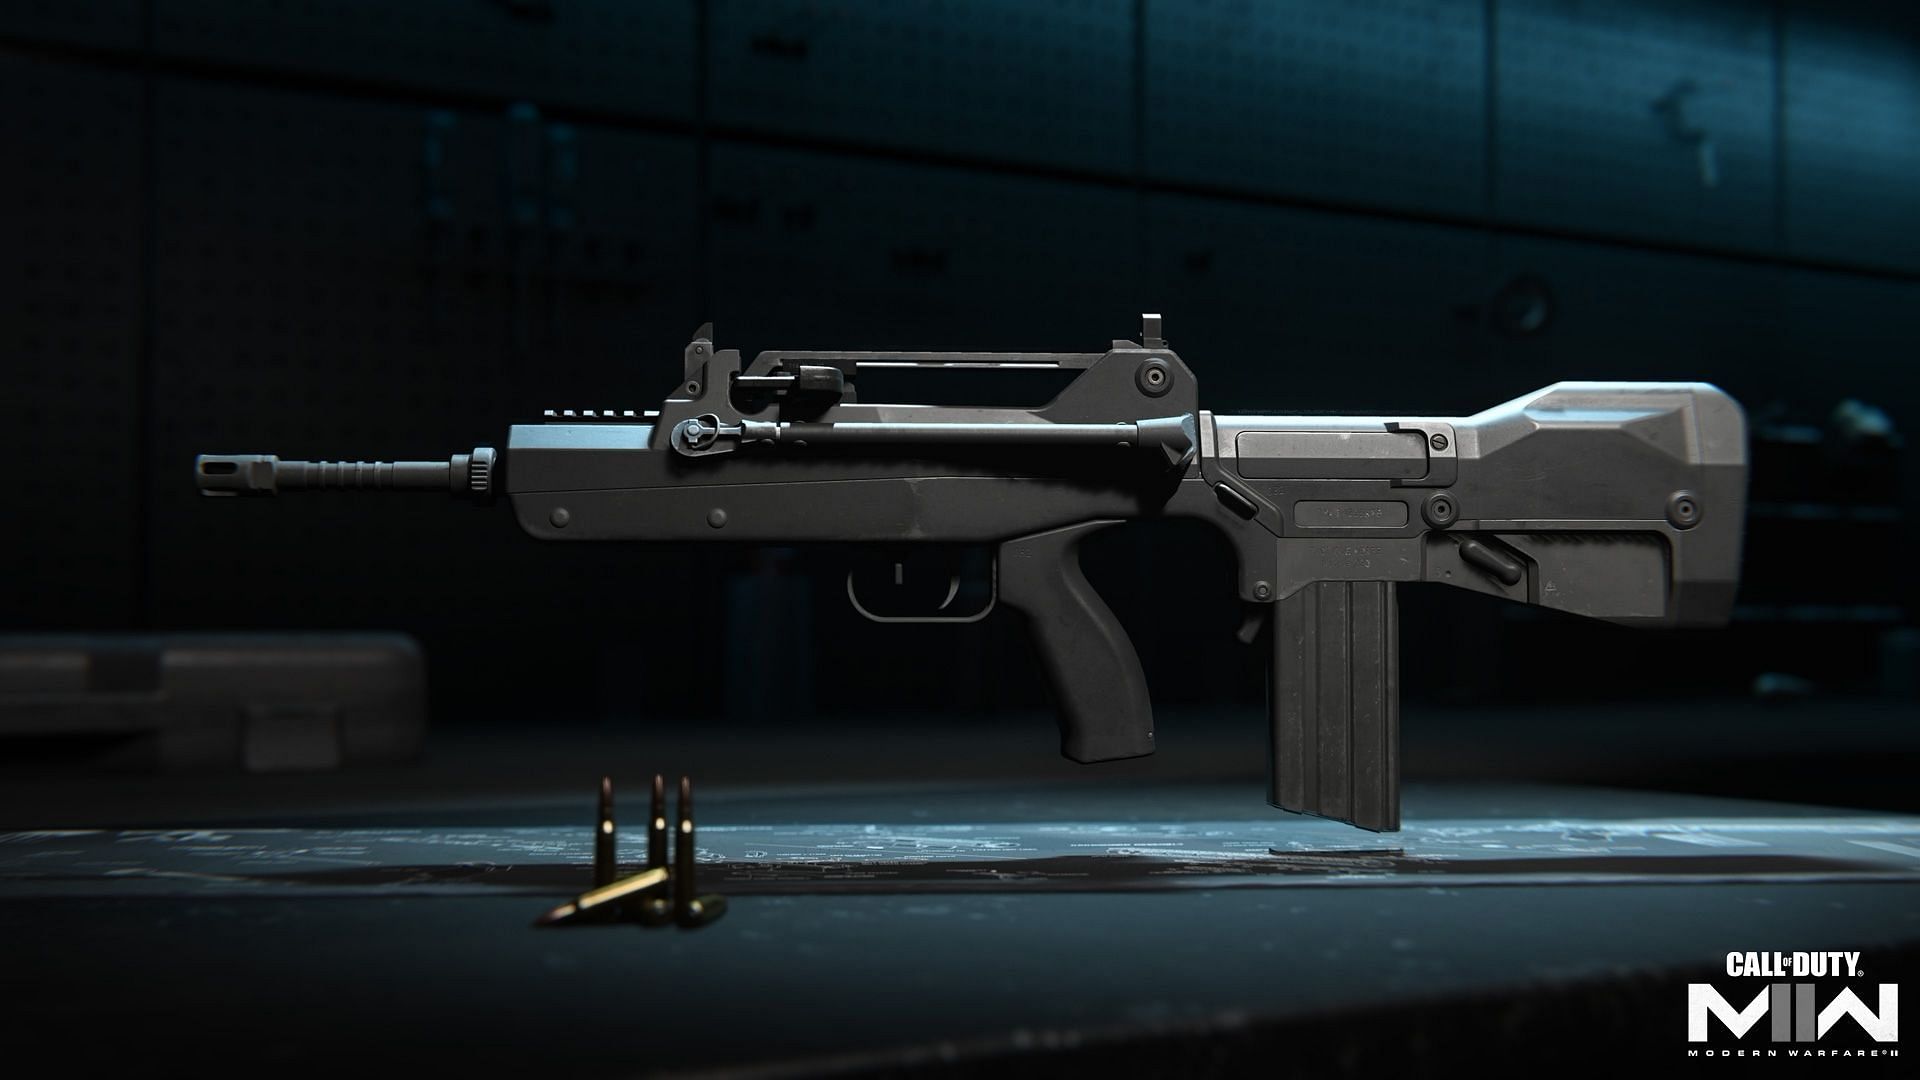 About the upcoming weapon FR Avancer in Warzone 2 and MW 2 (image via Activision)